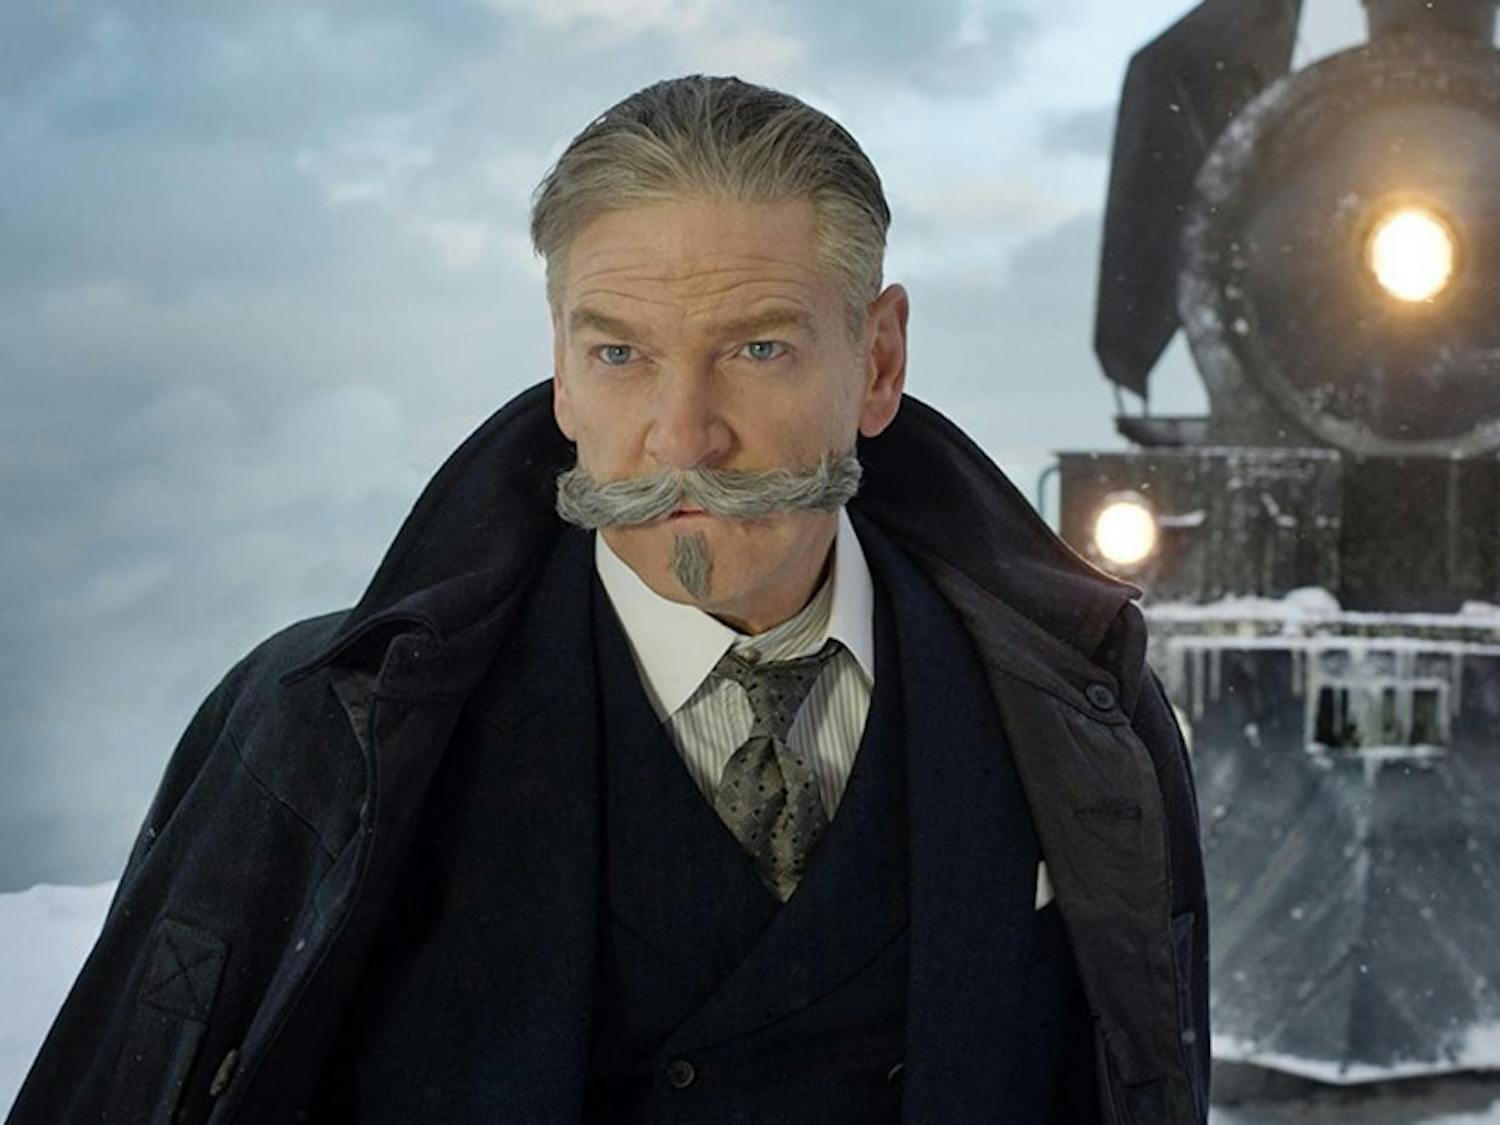 Directed by and starring Kenneth Branagh, "Murder on the Orient Express" is an adequate middle-market action movie.